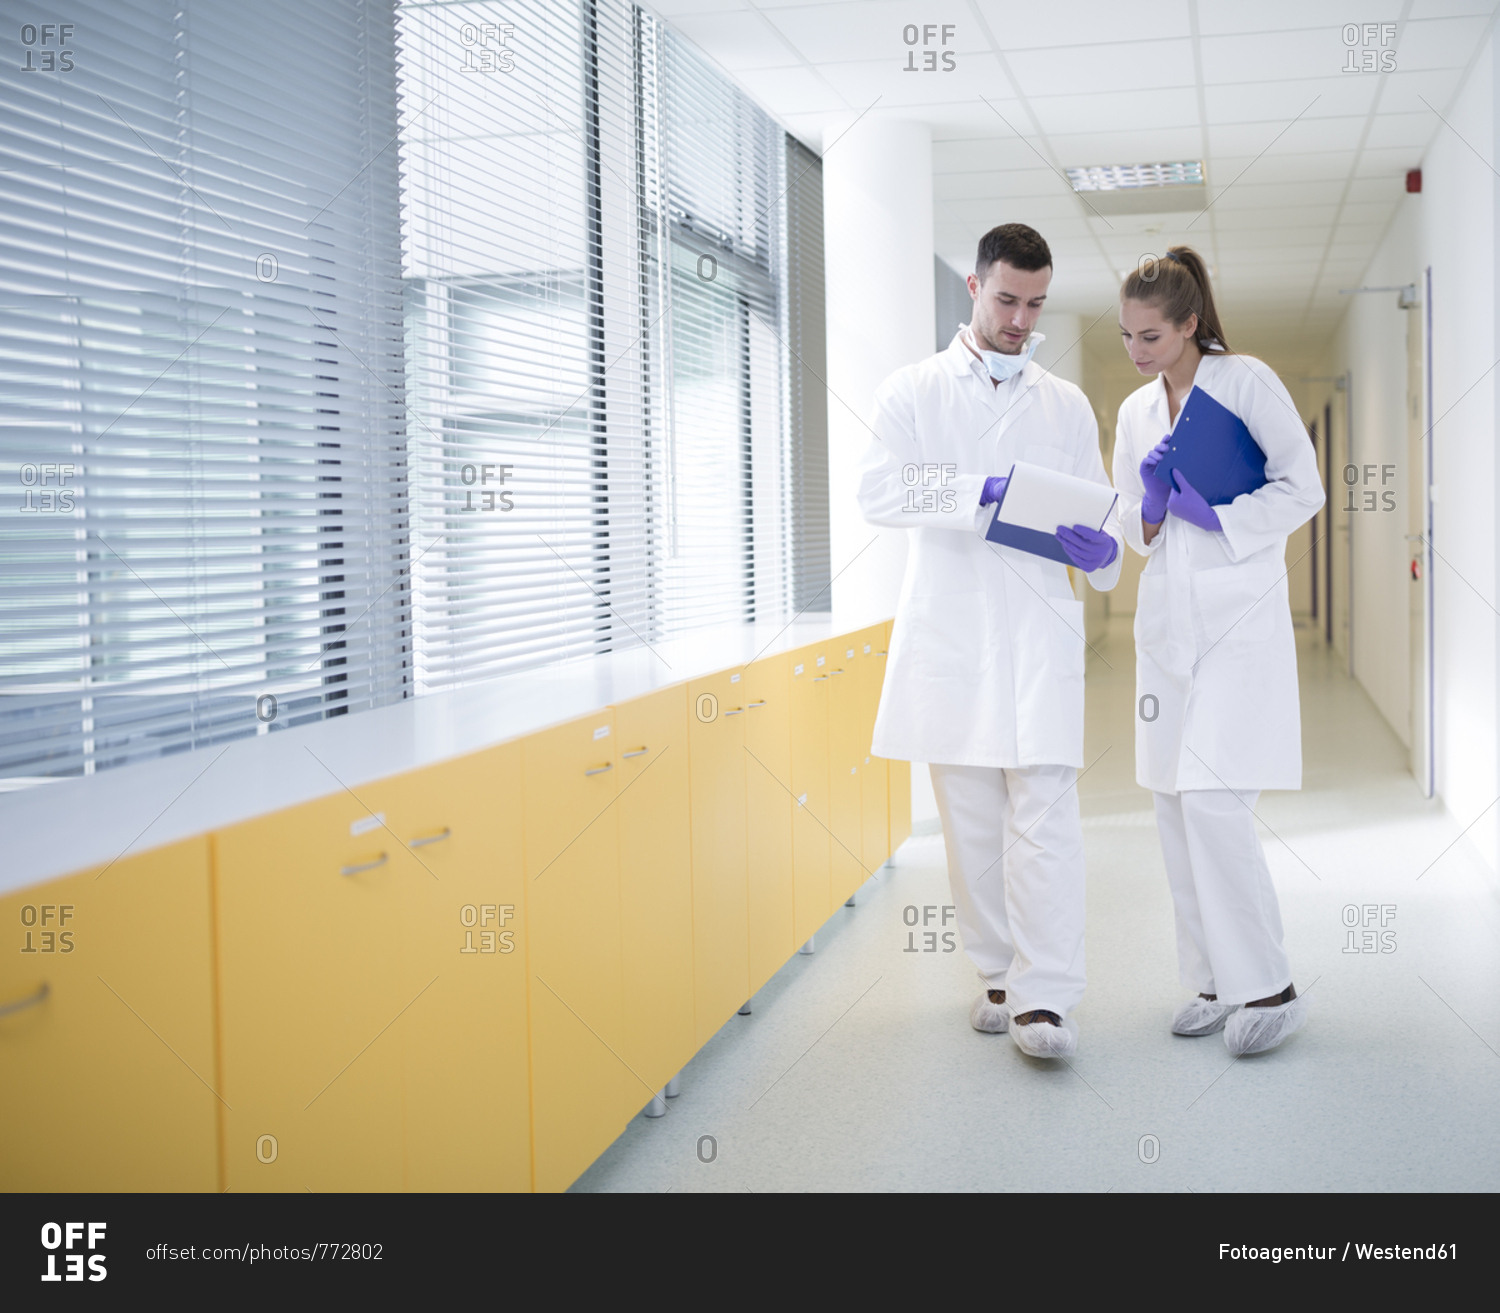 Man and woman in lab coats discussing on hallway